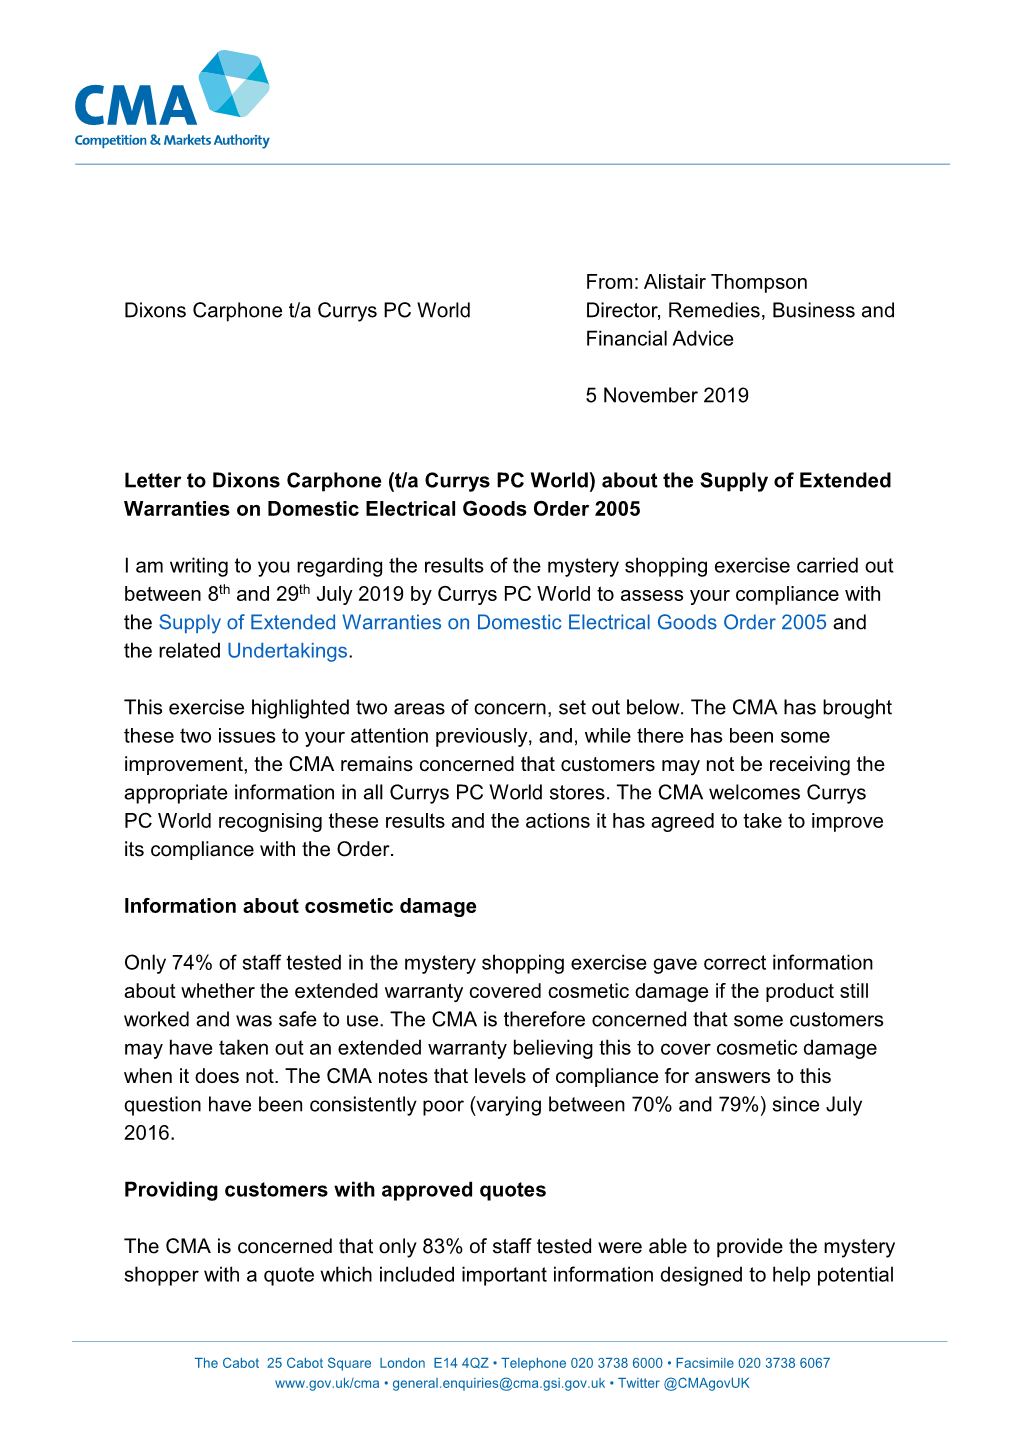 Letter to Dixons Carphone (T/A Currys PC World) About the Supply of Extended Warranties on Domestic Electrical Goods Order 2005